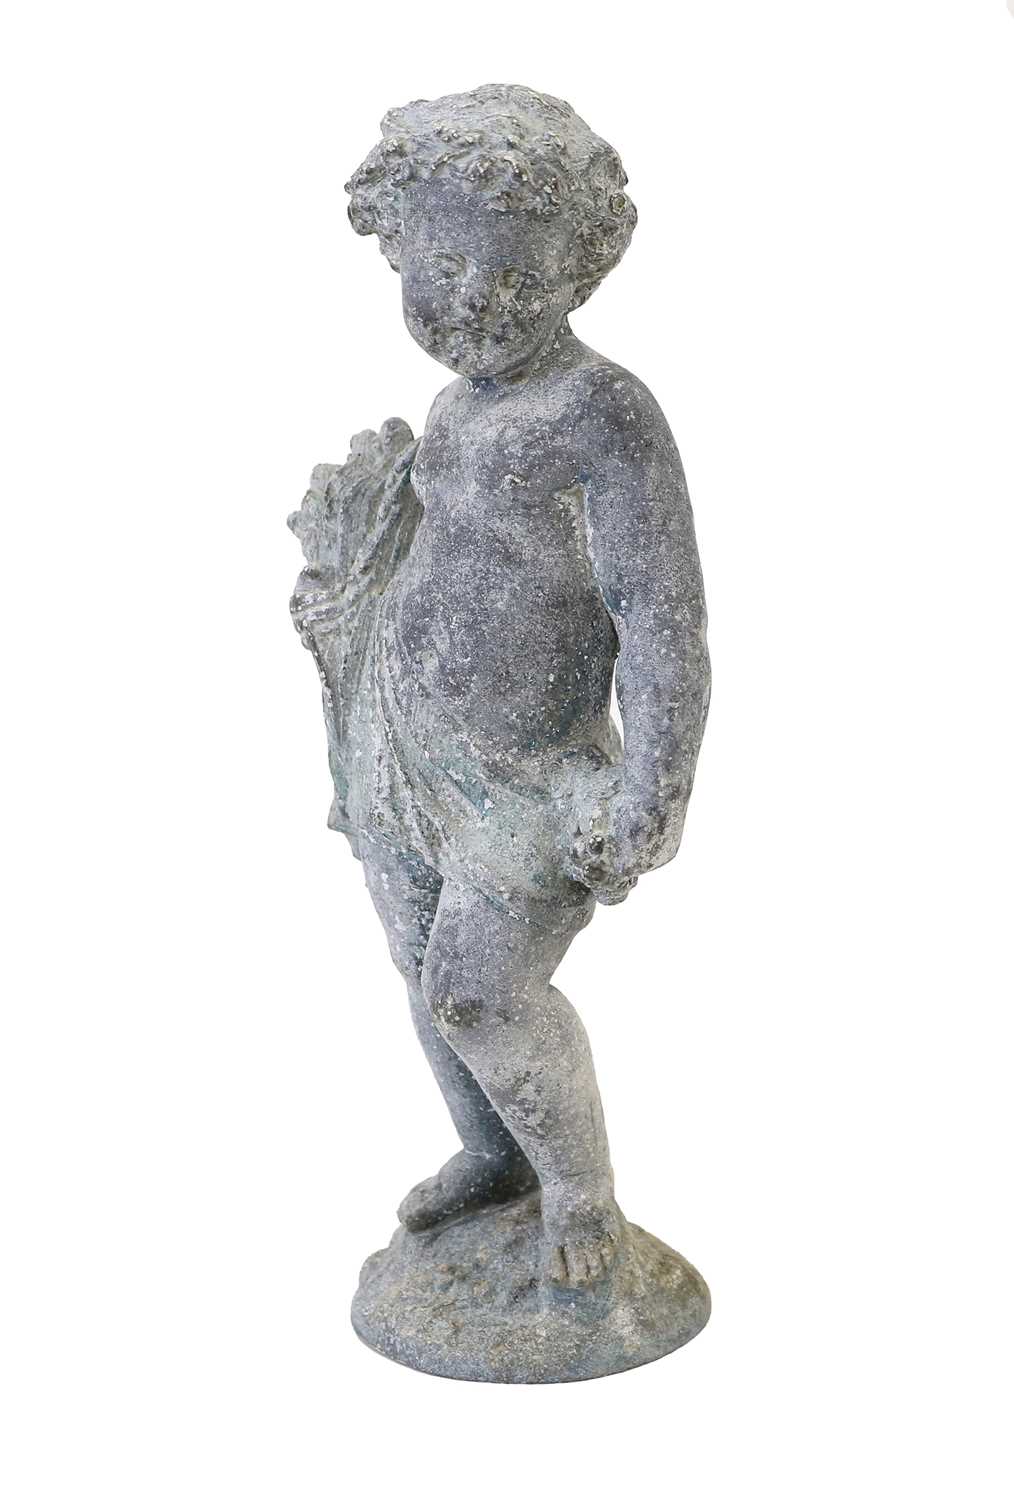 A Lead Figure of Summer from The Seasons, in 18th century style, as a loosely draped putto holding a